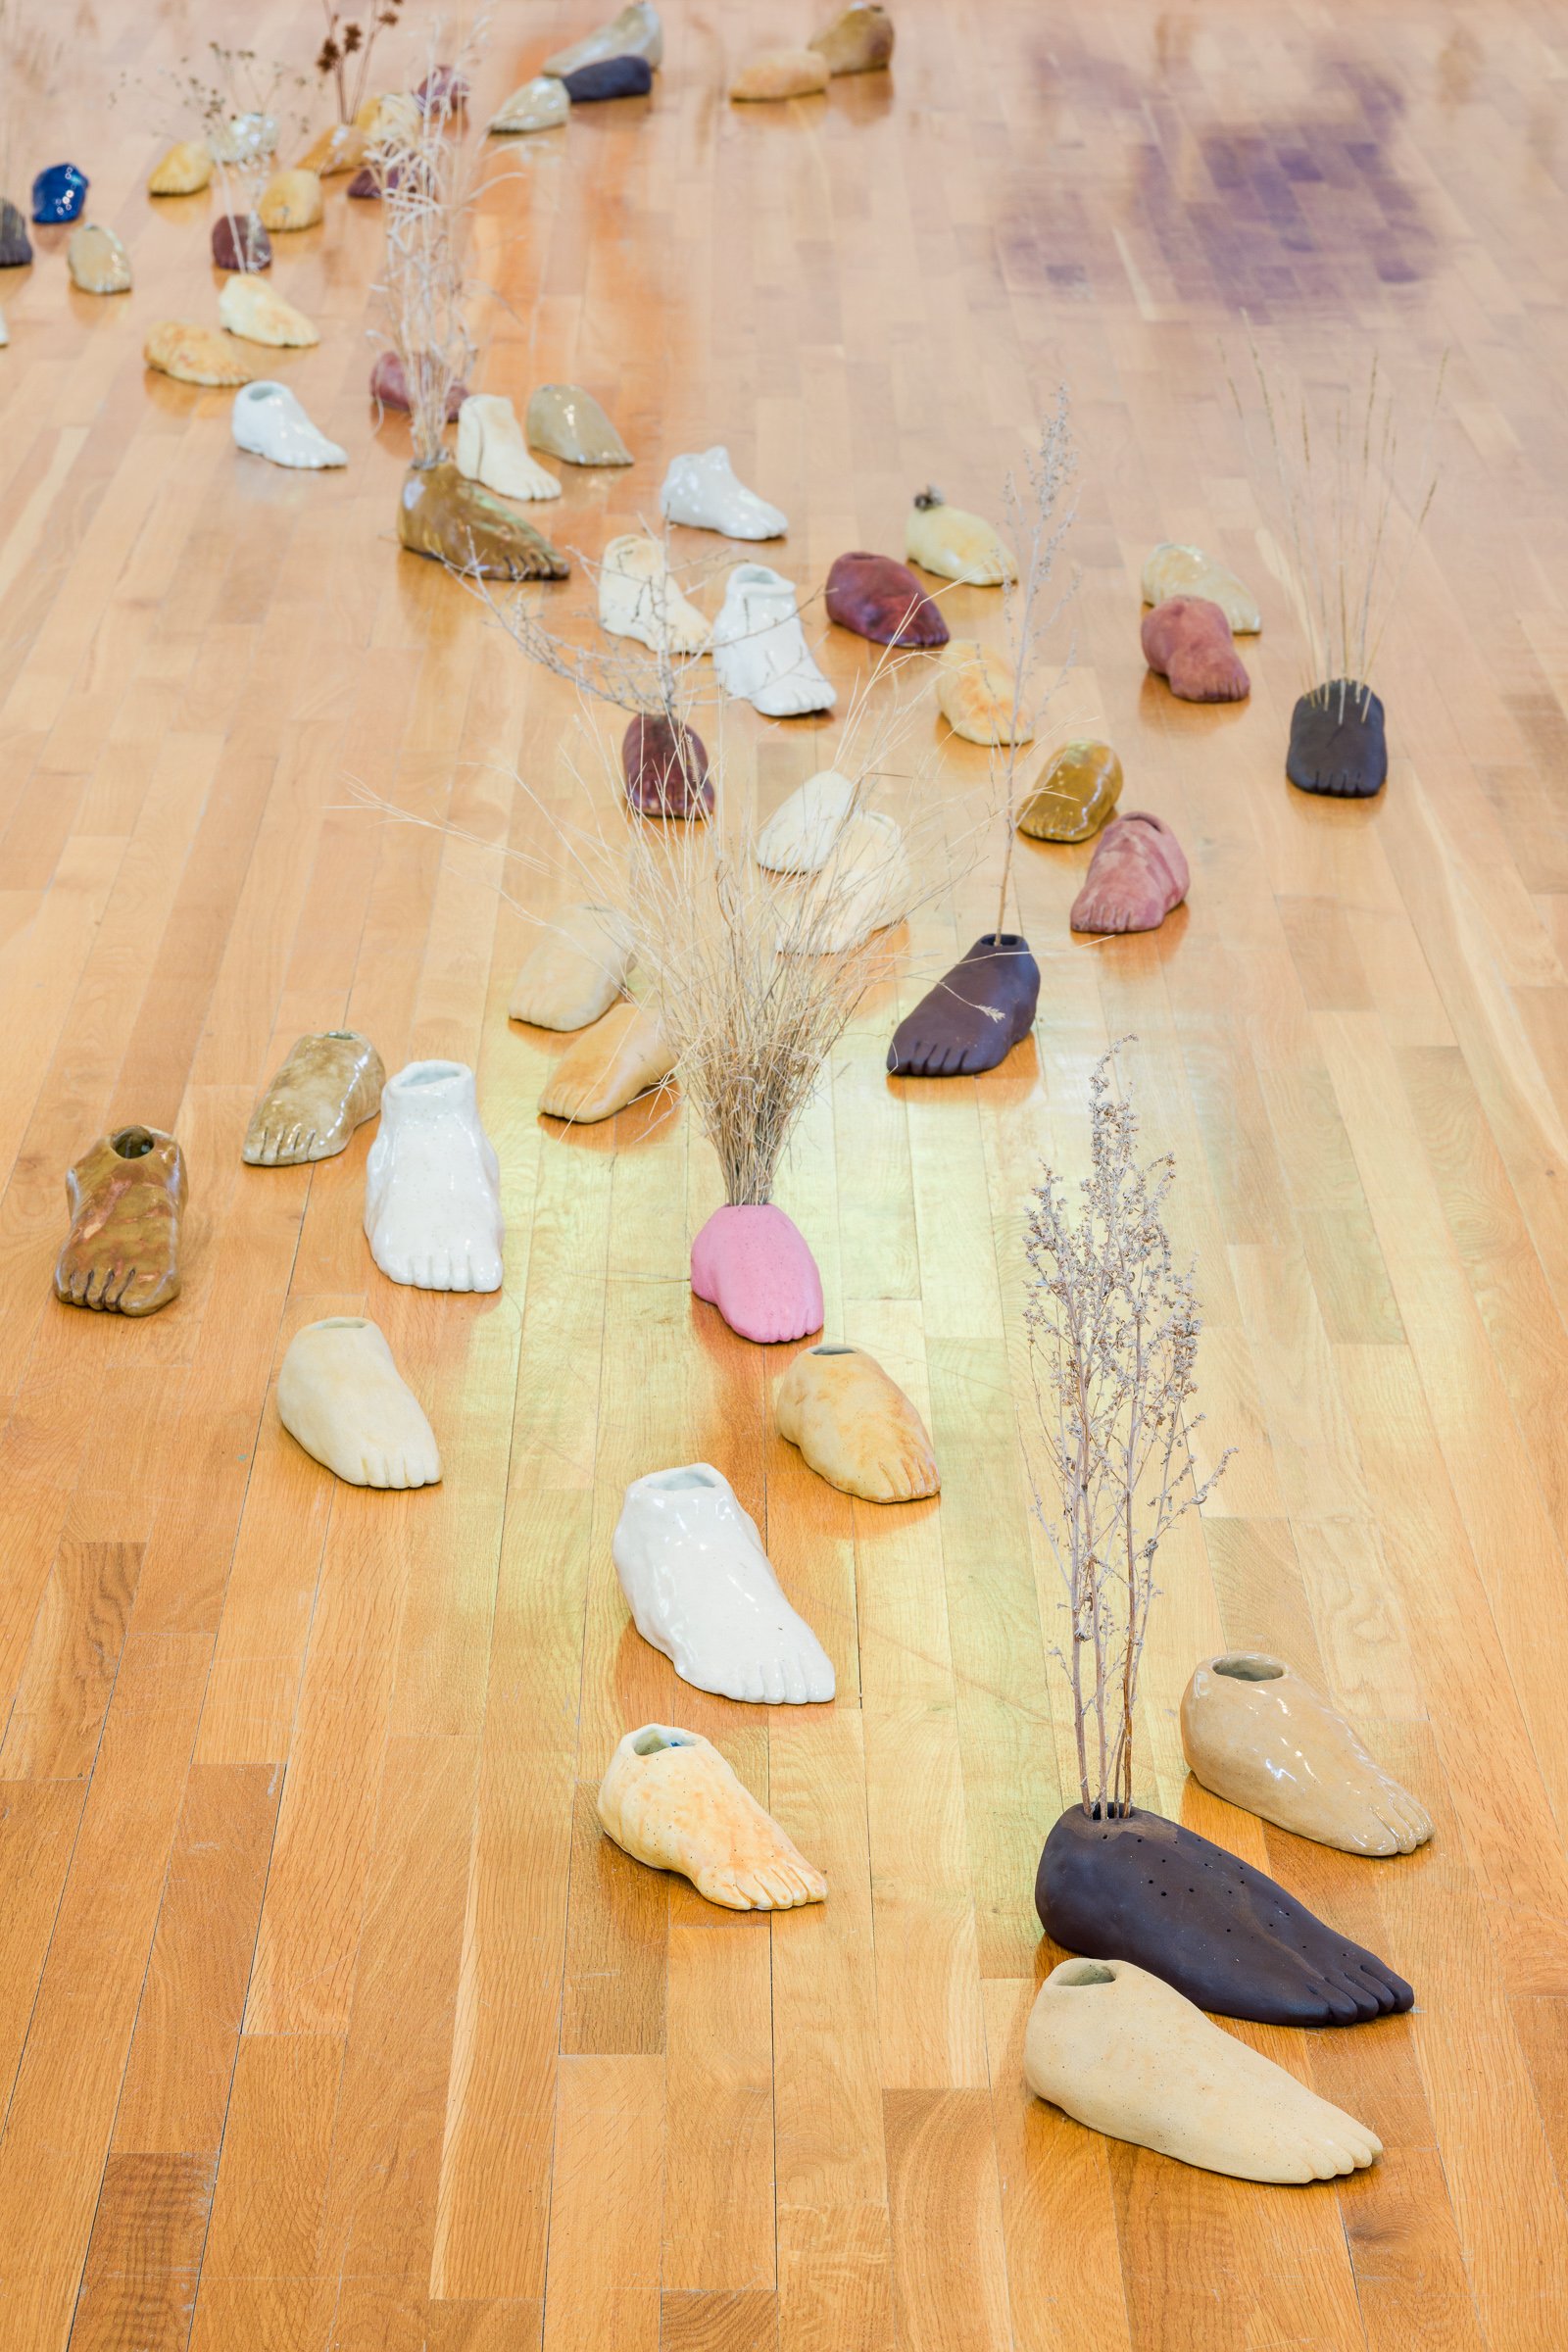  Installation view of  Gathering near and far, still  by April Matisz showing  Walking landscape , ceramics and plant materials, 2020-2023. Courtesy of the artist. Photo by Blaine Campbell. 